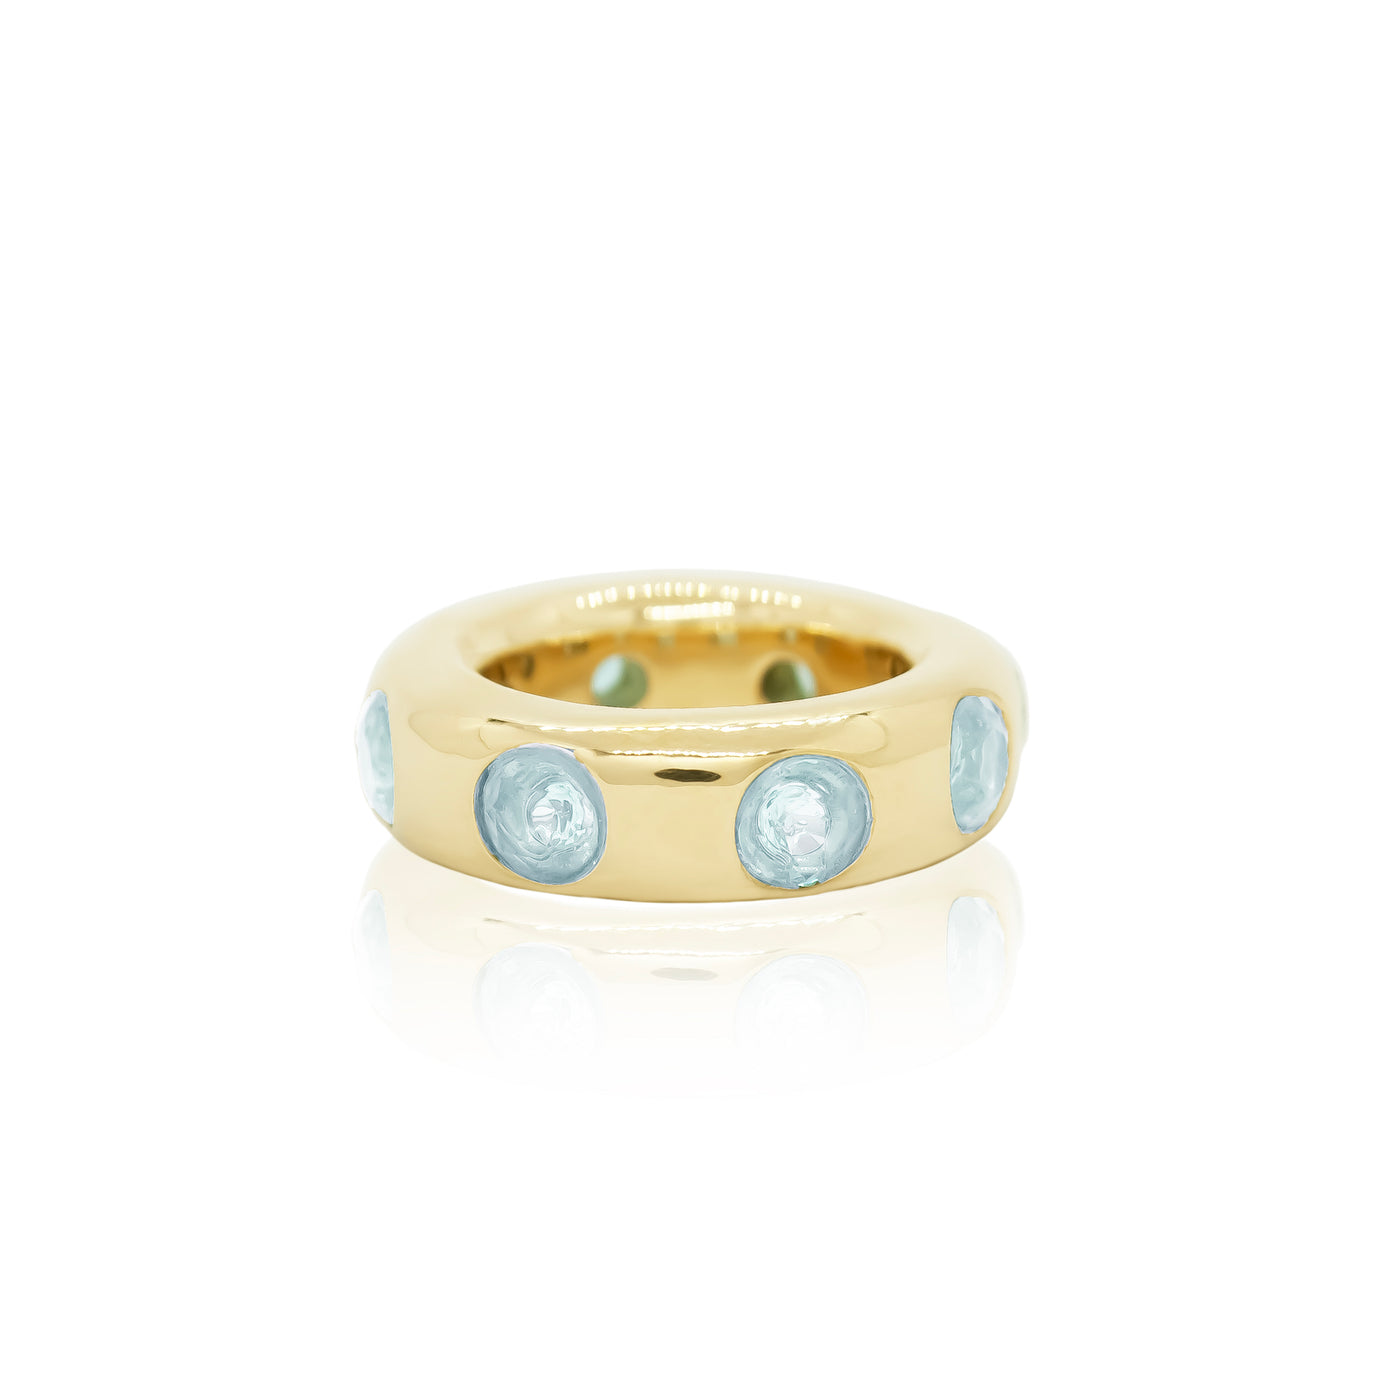 thick band gold ring with 8 aquamarines from Atelier ORMAN